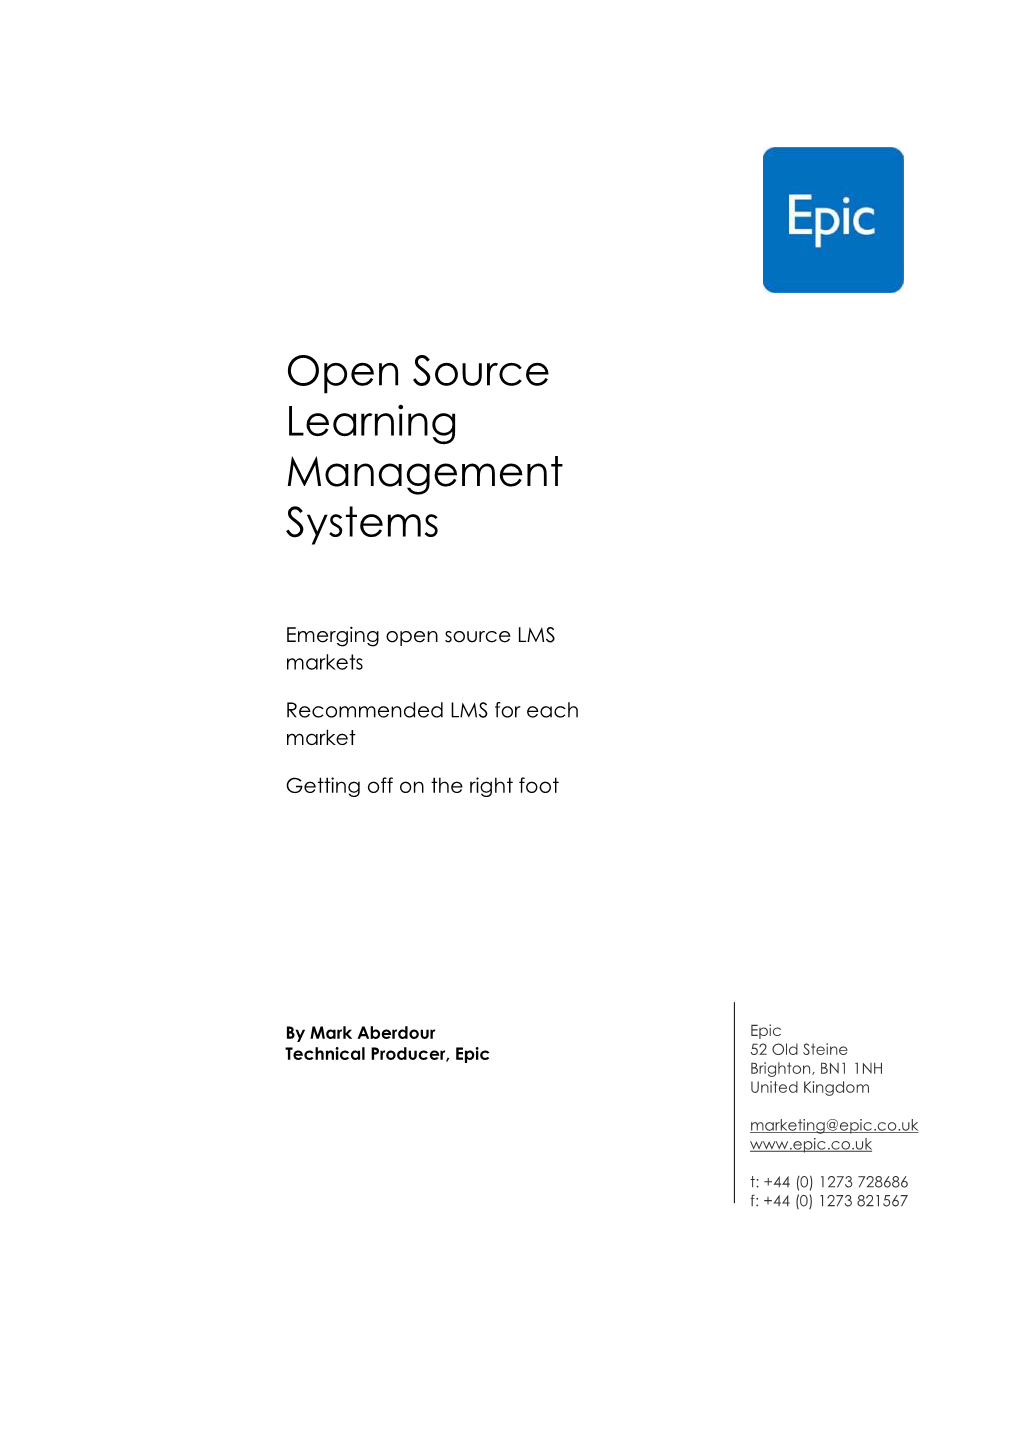 Open Source Learning Management Systems